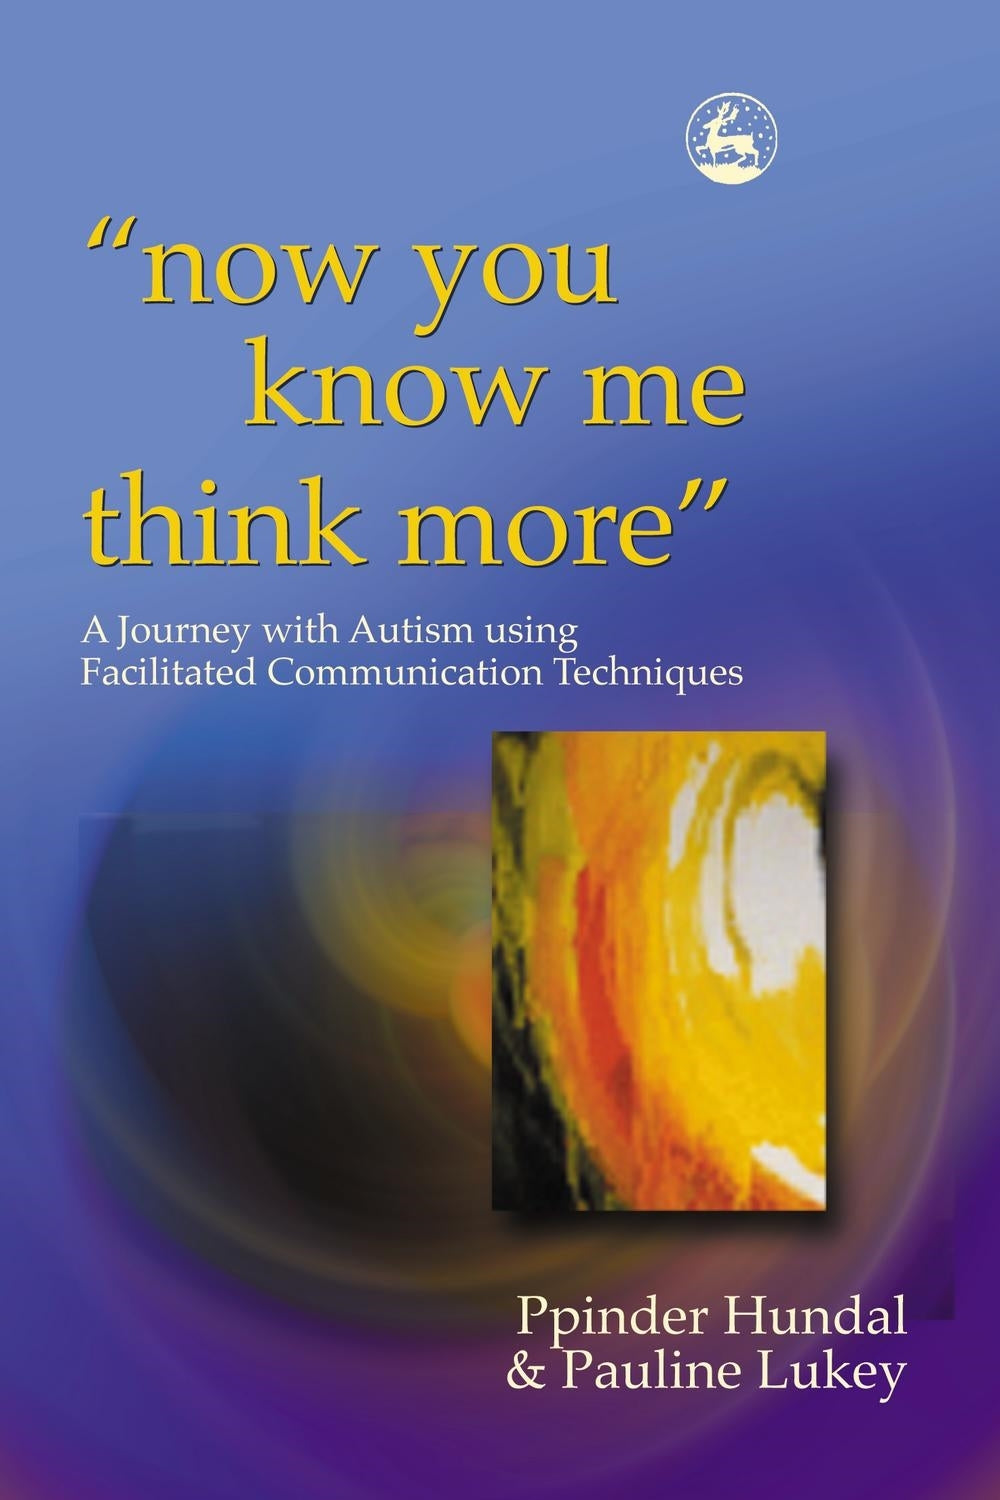 now you know me think more' by Pauline Lukey